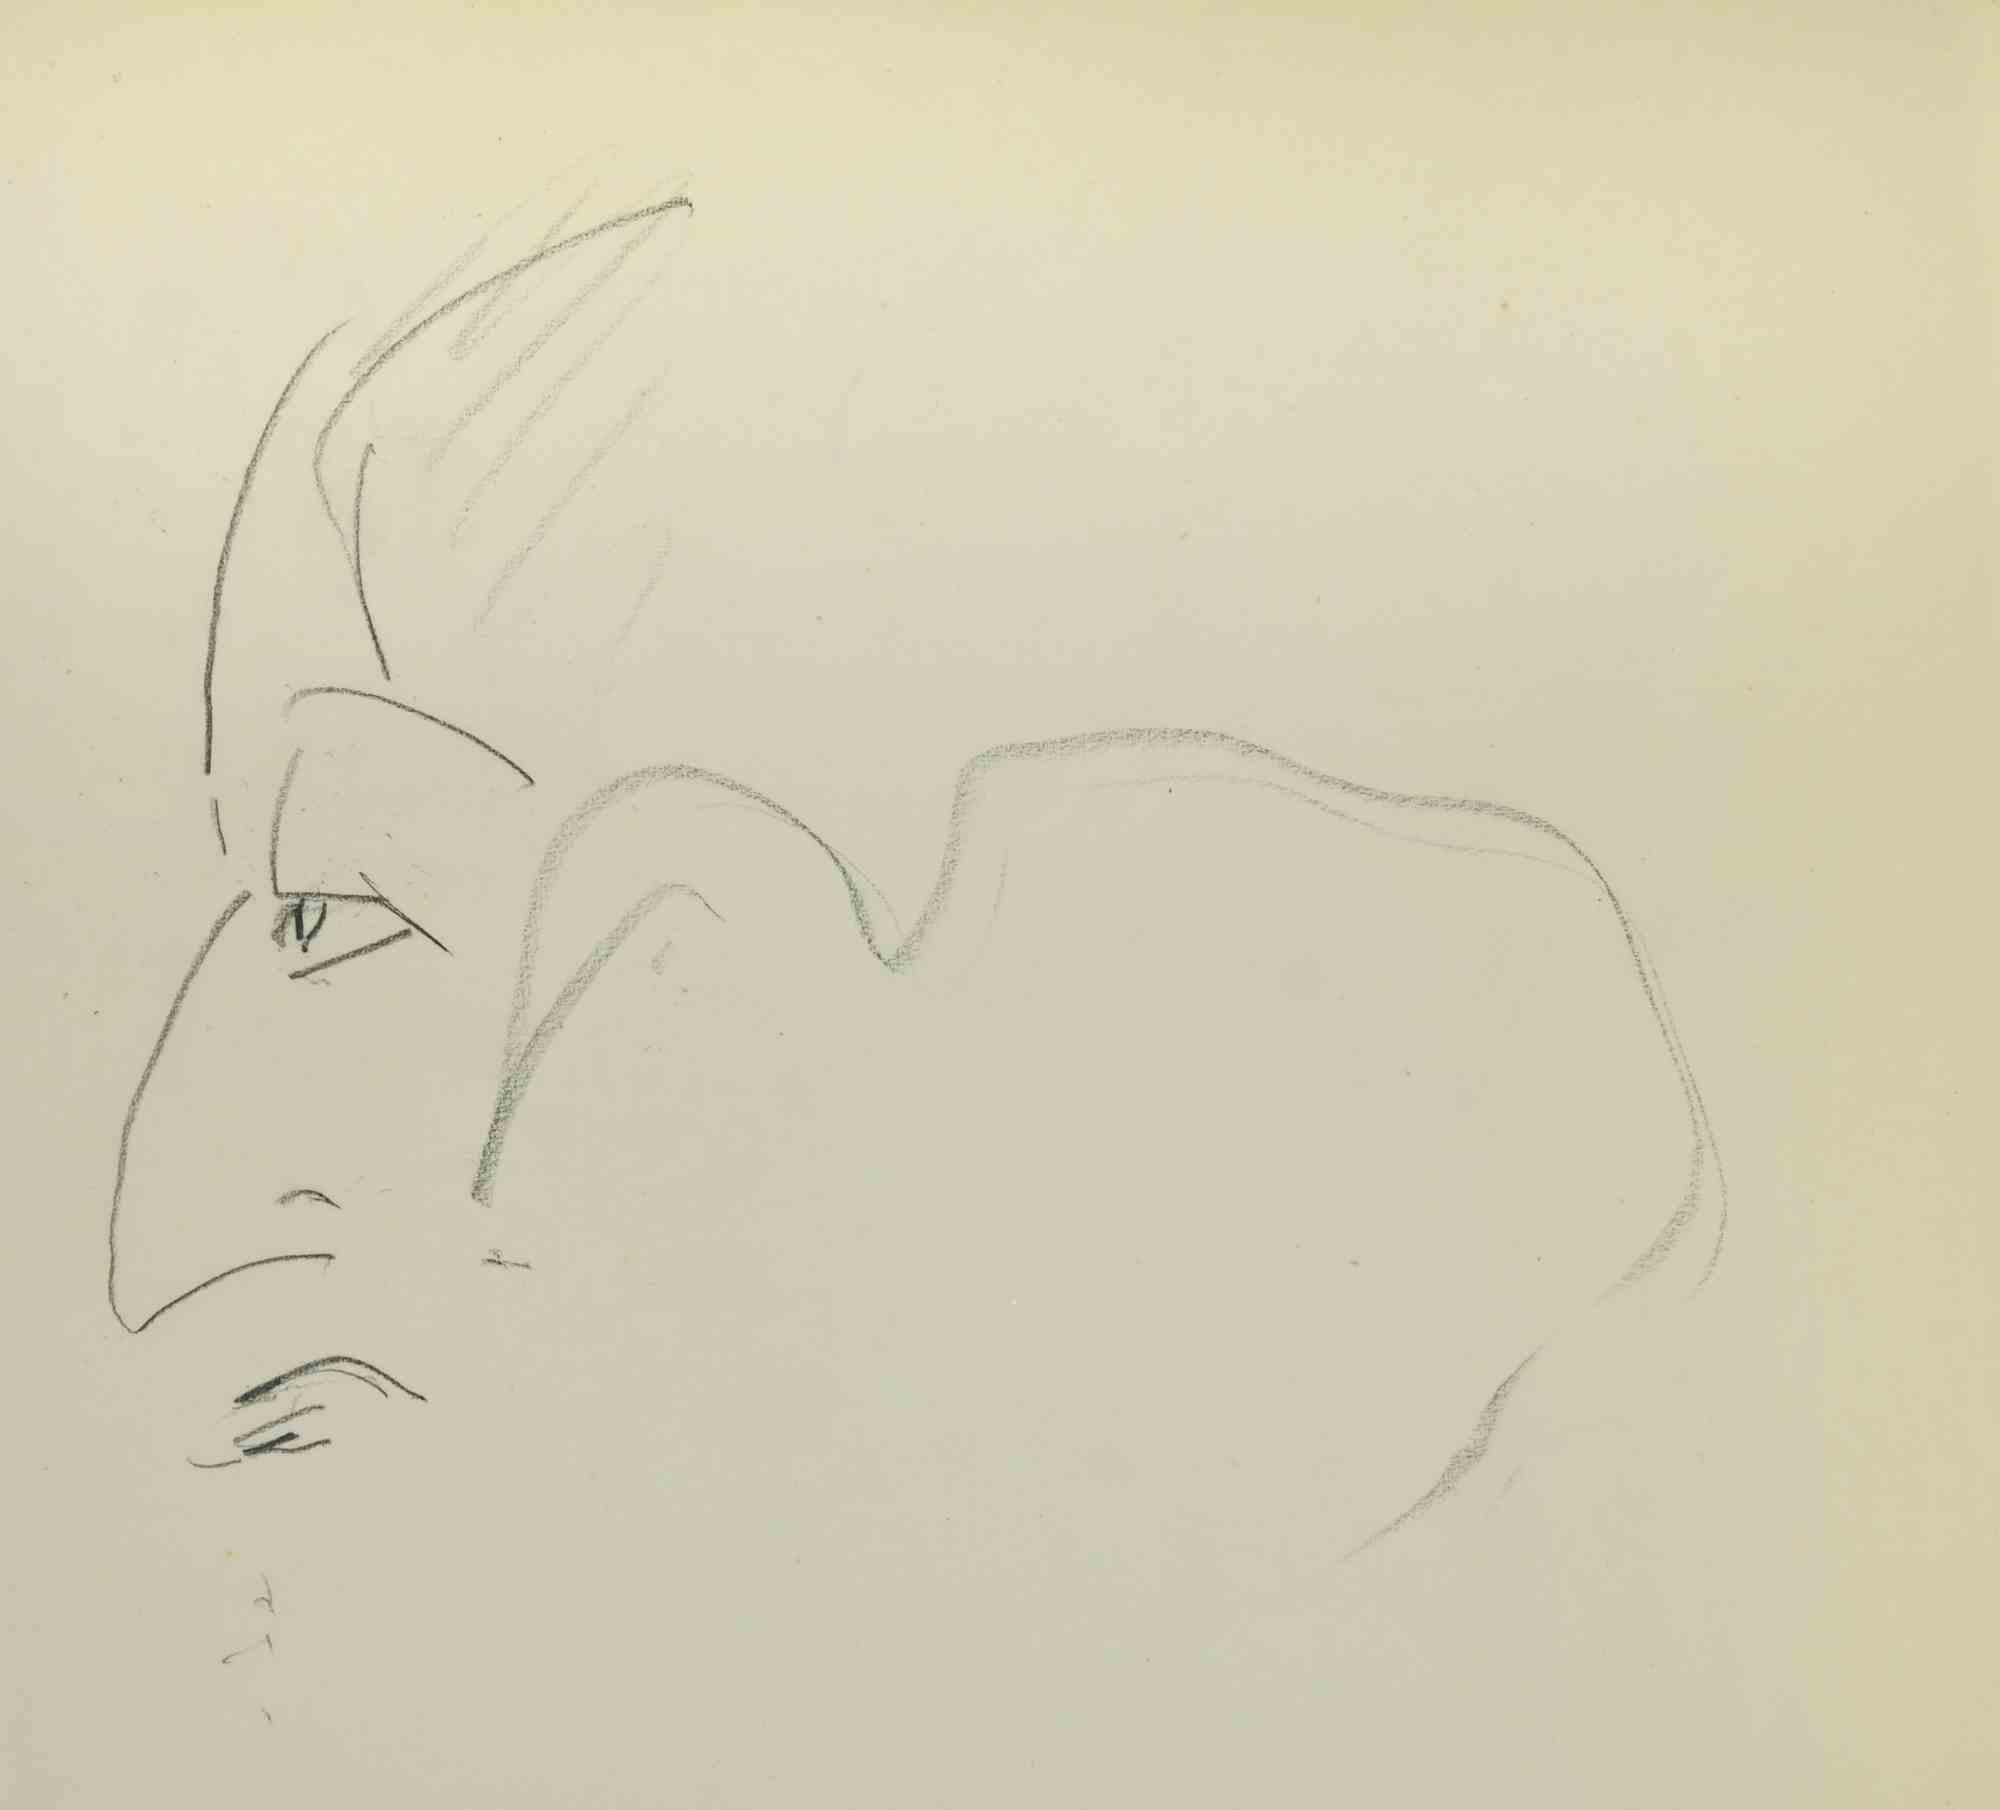 Sketch for a Portrait is a drawing on paper realized in the Mid-20th Century by Flor David.

Pencil on Creamy-colored paper.

Good conditions.

Flor David (1891-1958) ): pseudonym of David Florence. Pastel painter. He was a pupil of Desirè Lucas. He